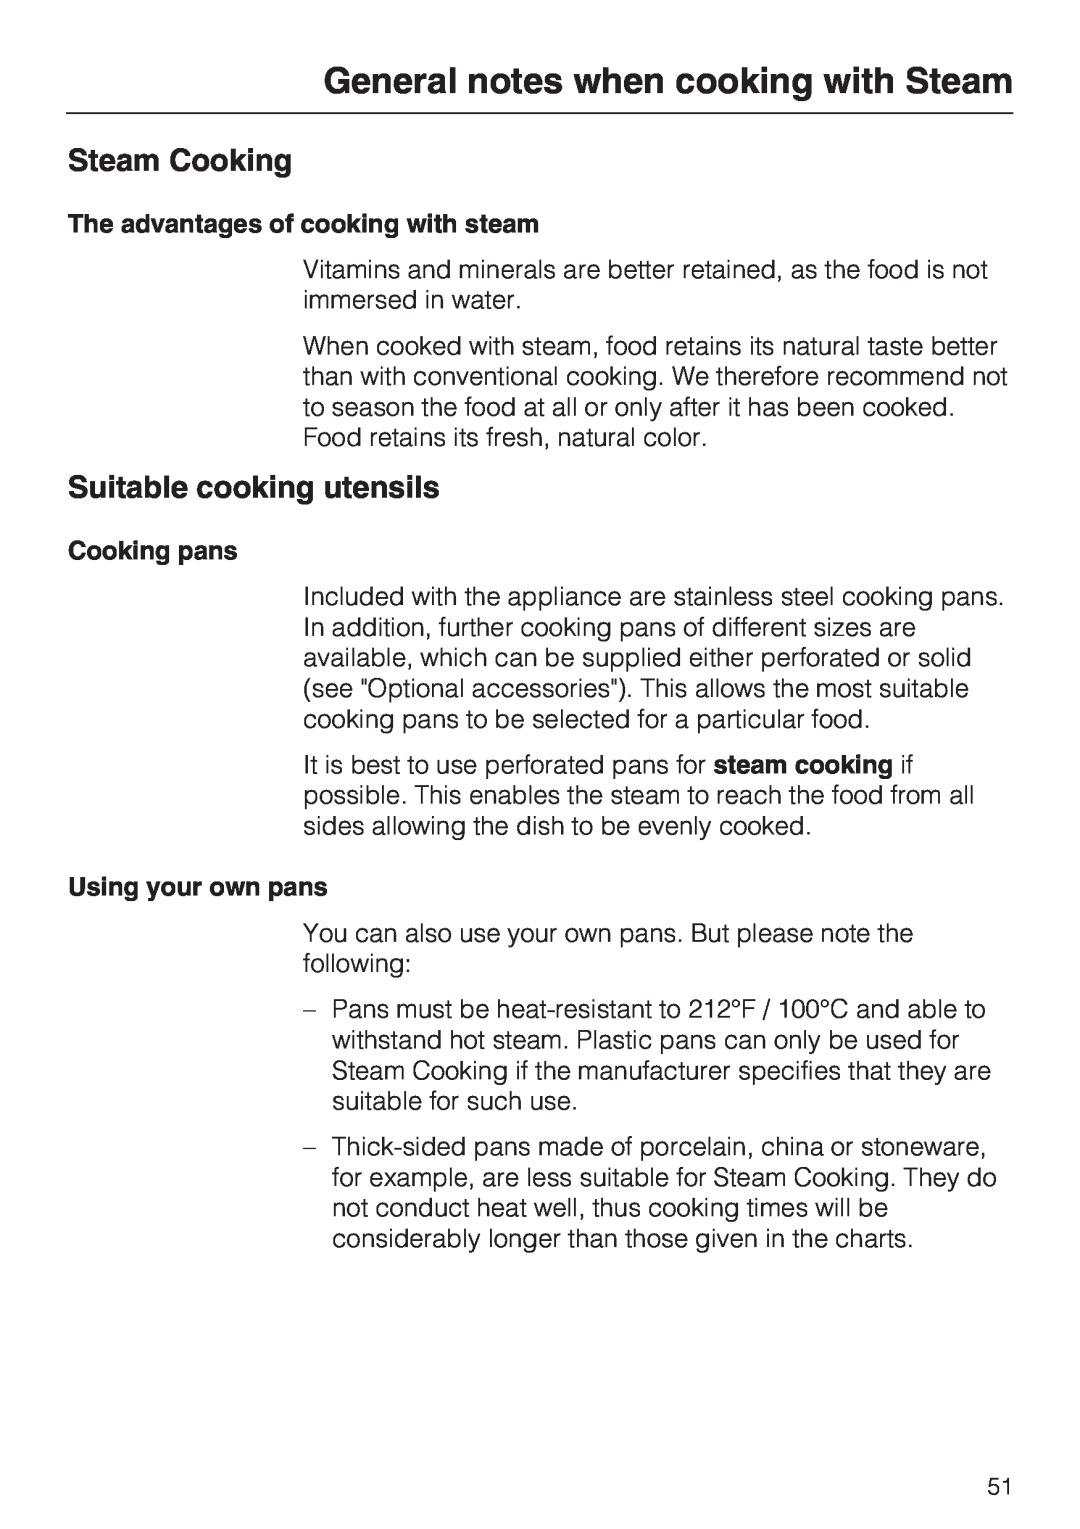 Miele 09 855 050 installation instructions General notes when cooking with Steam, Steam Cooking, Suitable cooking utensils 